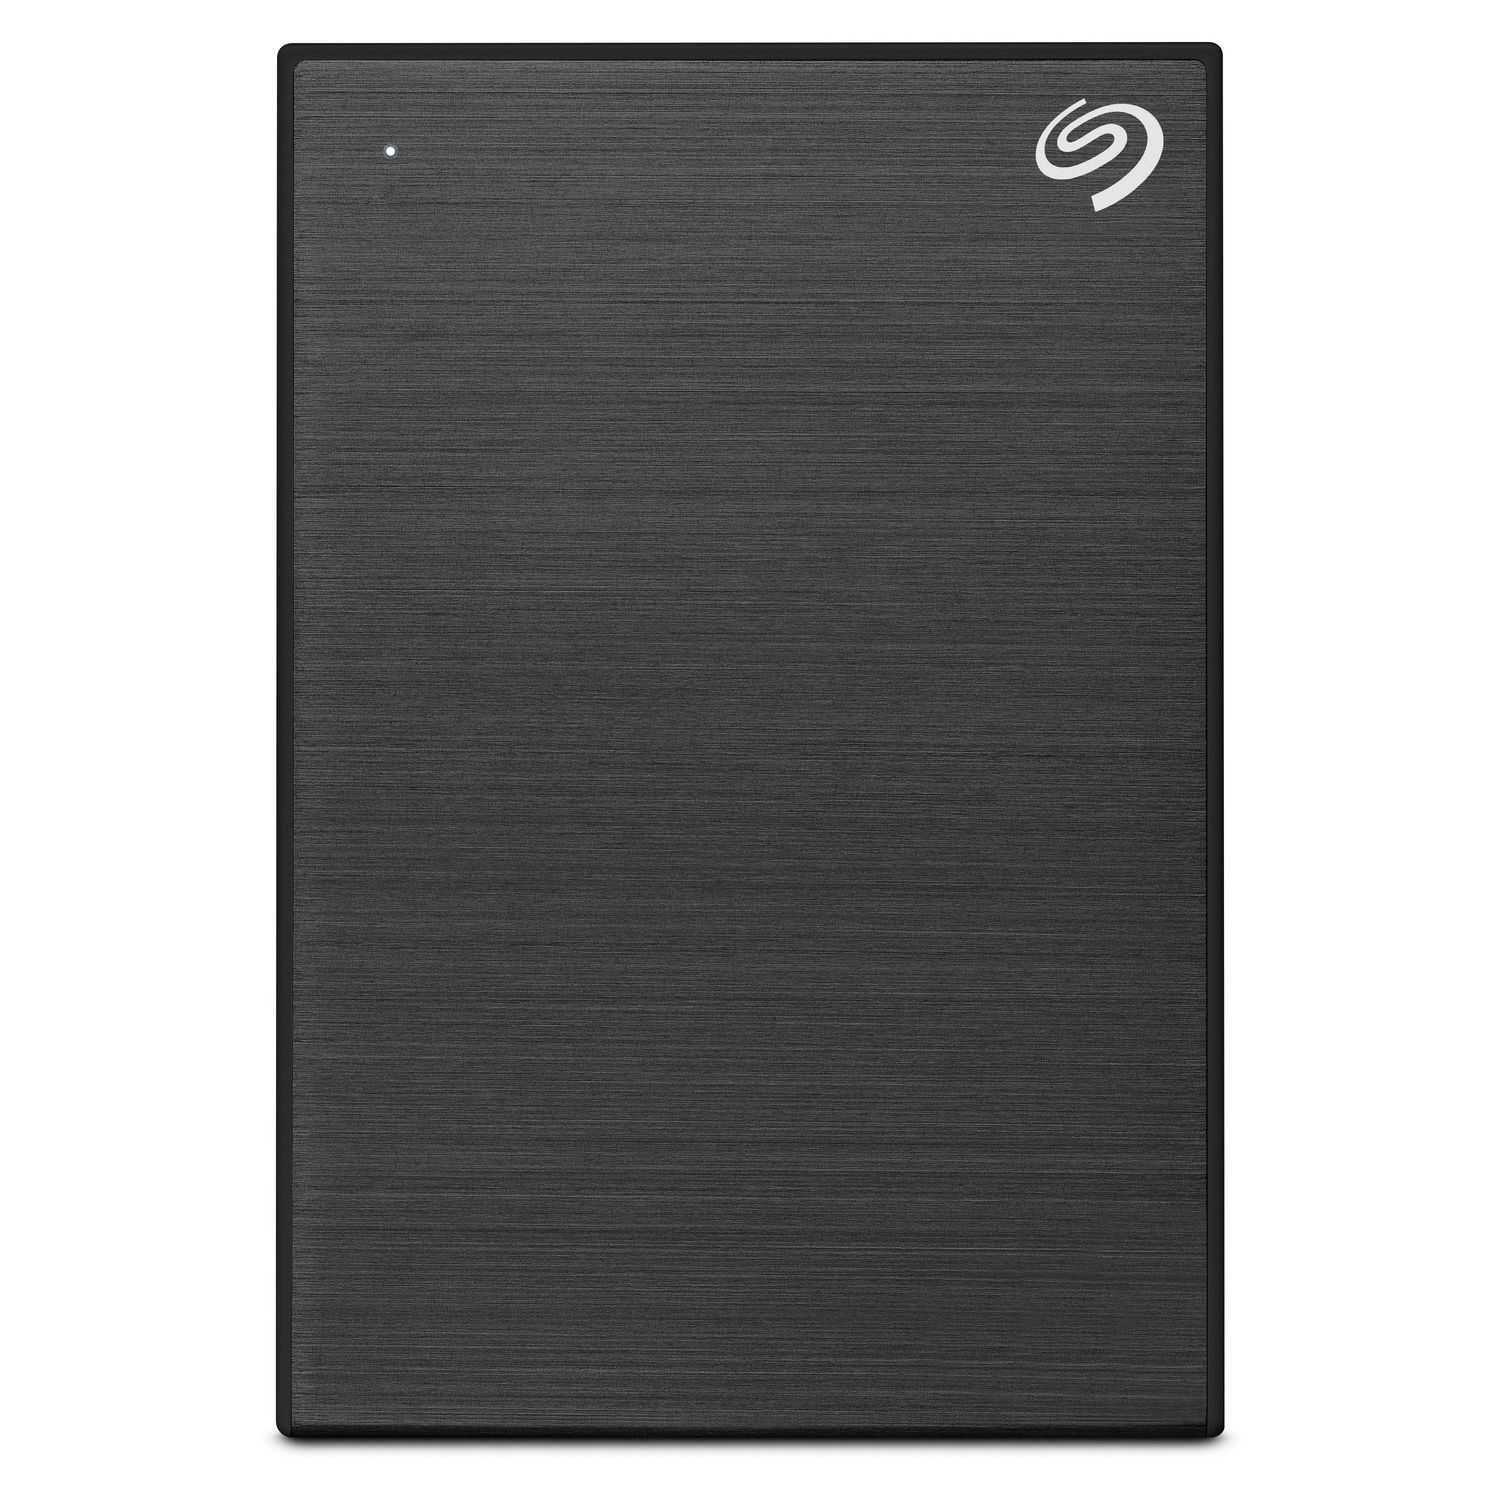 Seagate One Touch HDD with password 1TB External Hard Drive